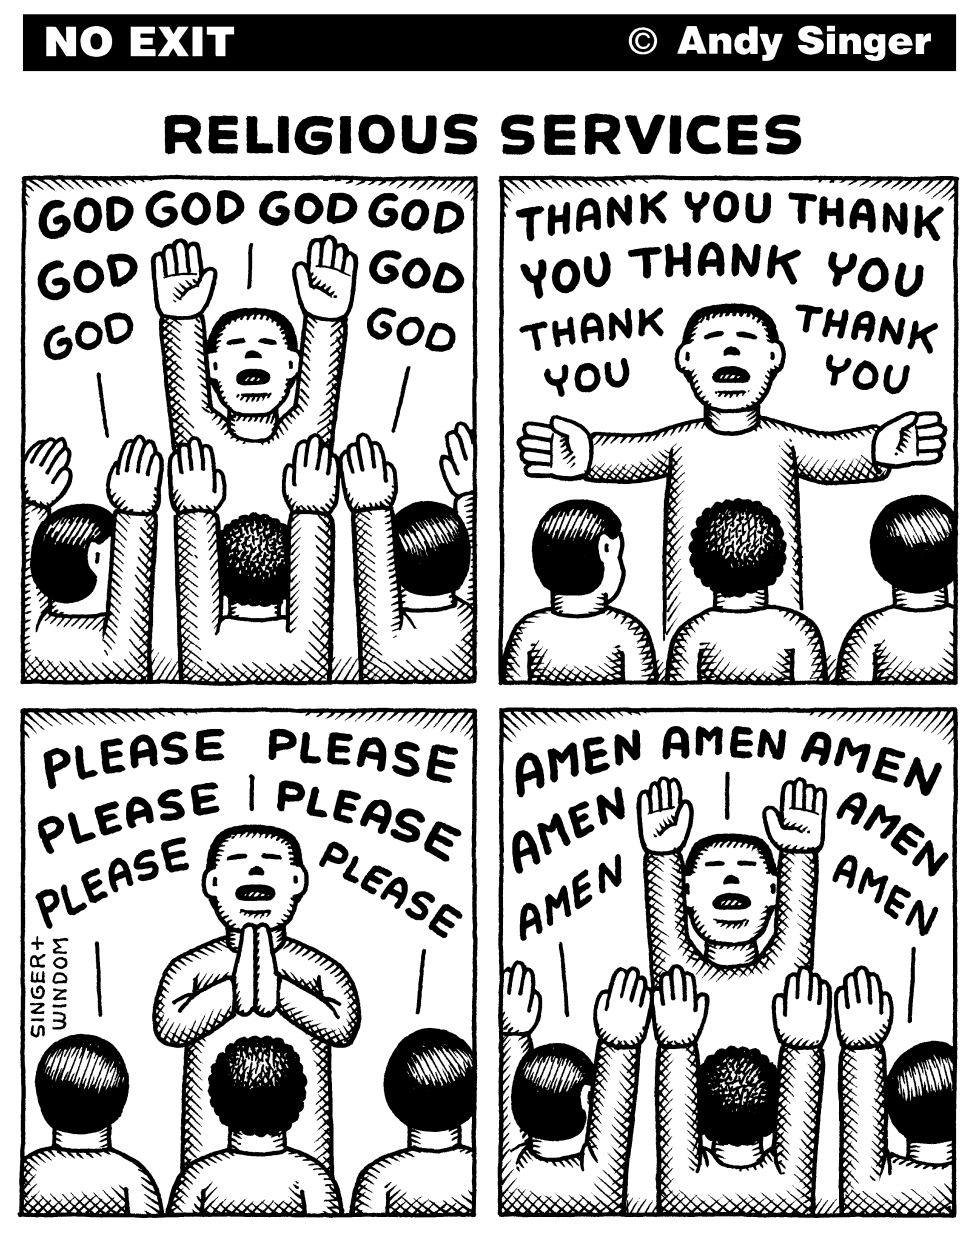  RELIGIOUS SERVICES by Andy Singer